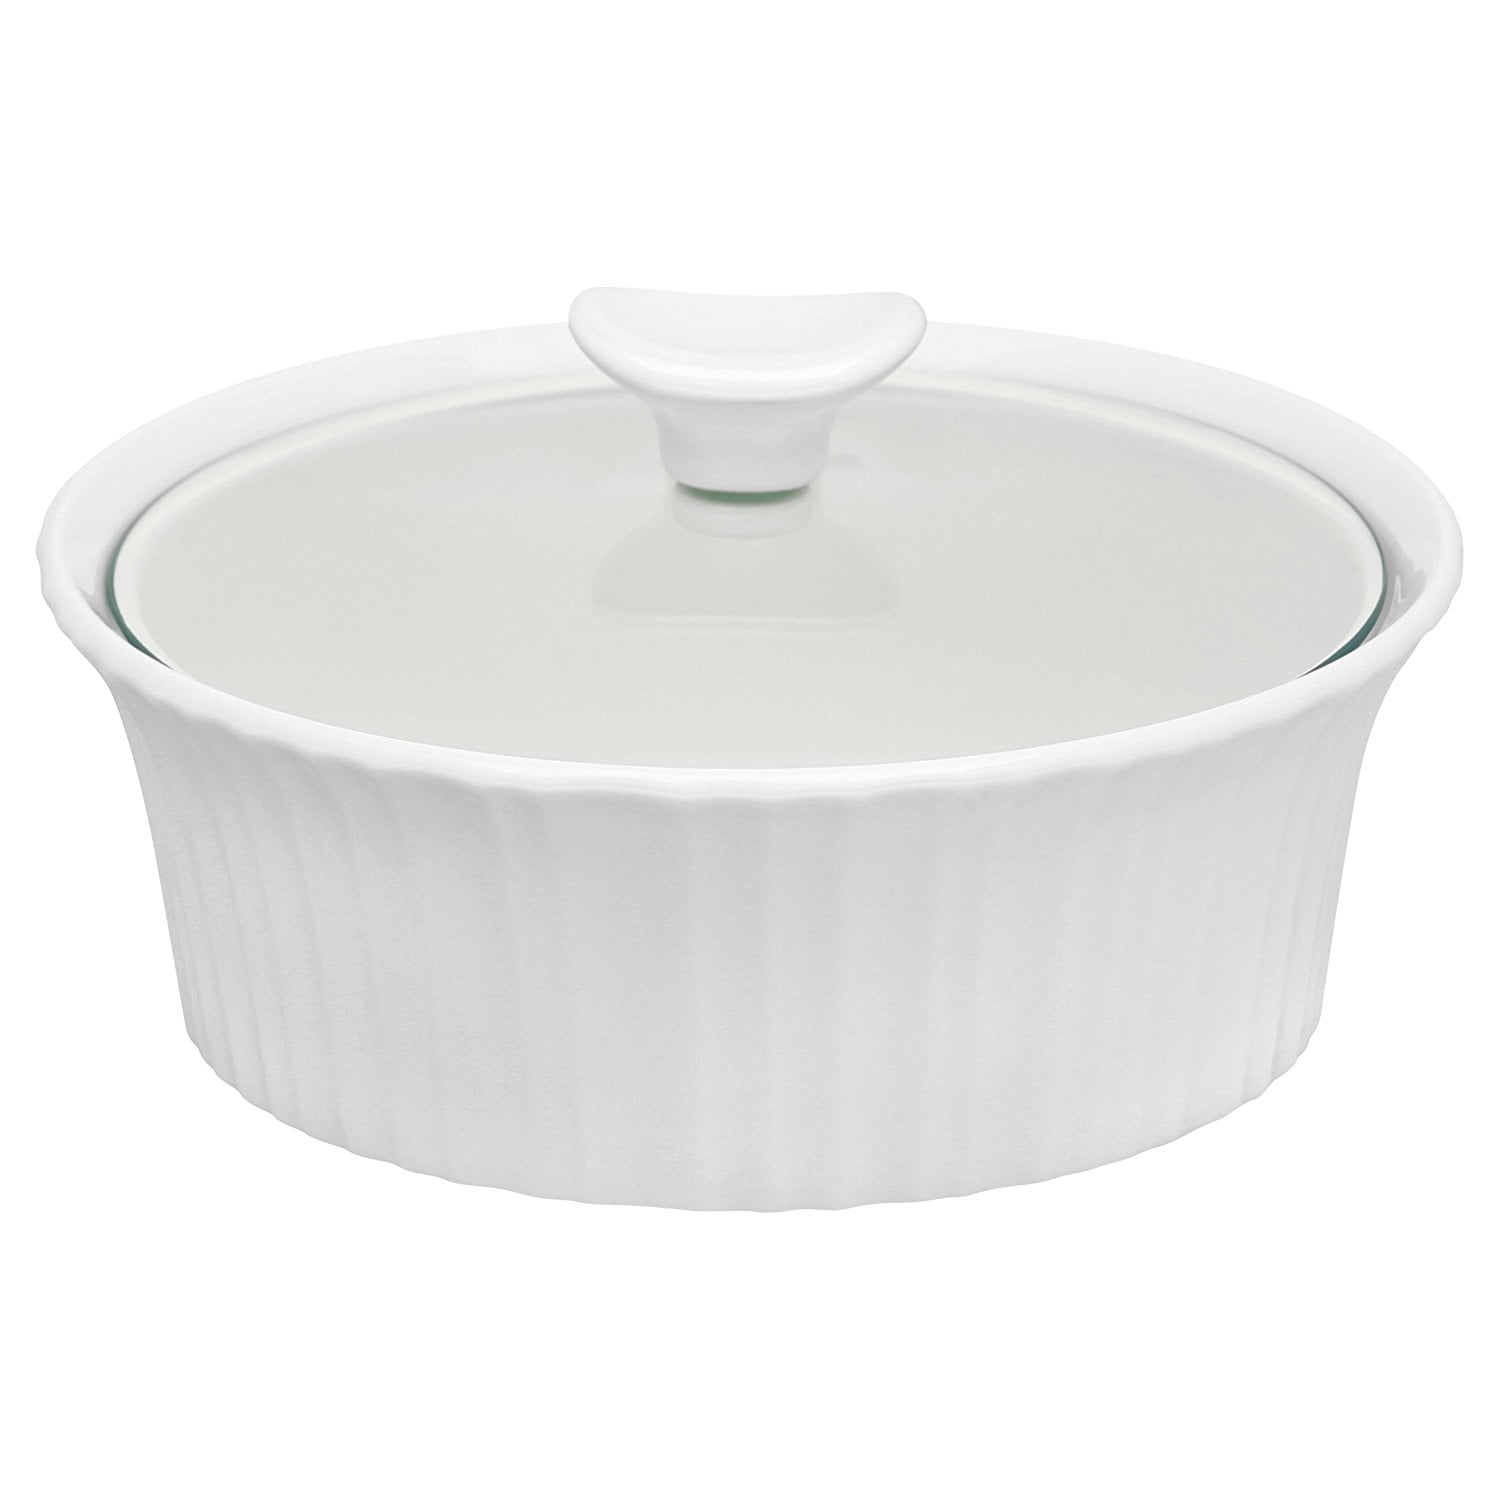 2.5 Qt Corningware 1105935 French White Oval Casserole with Glass Cover 